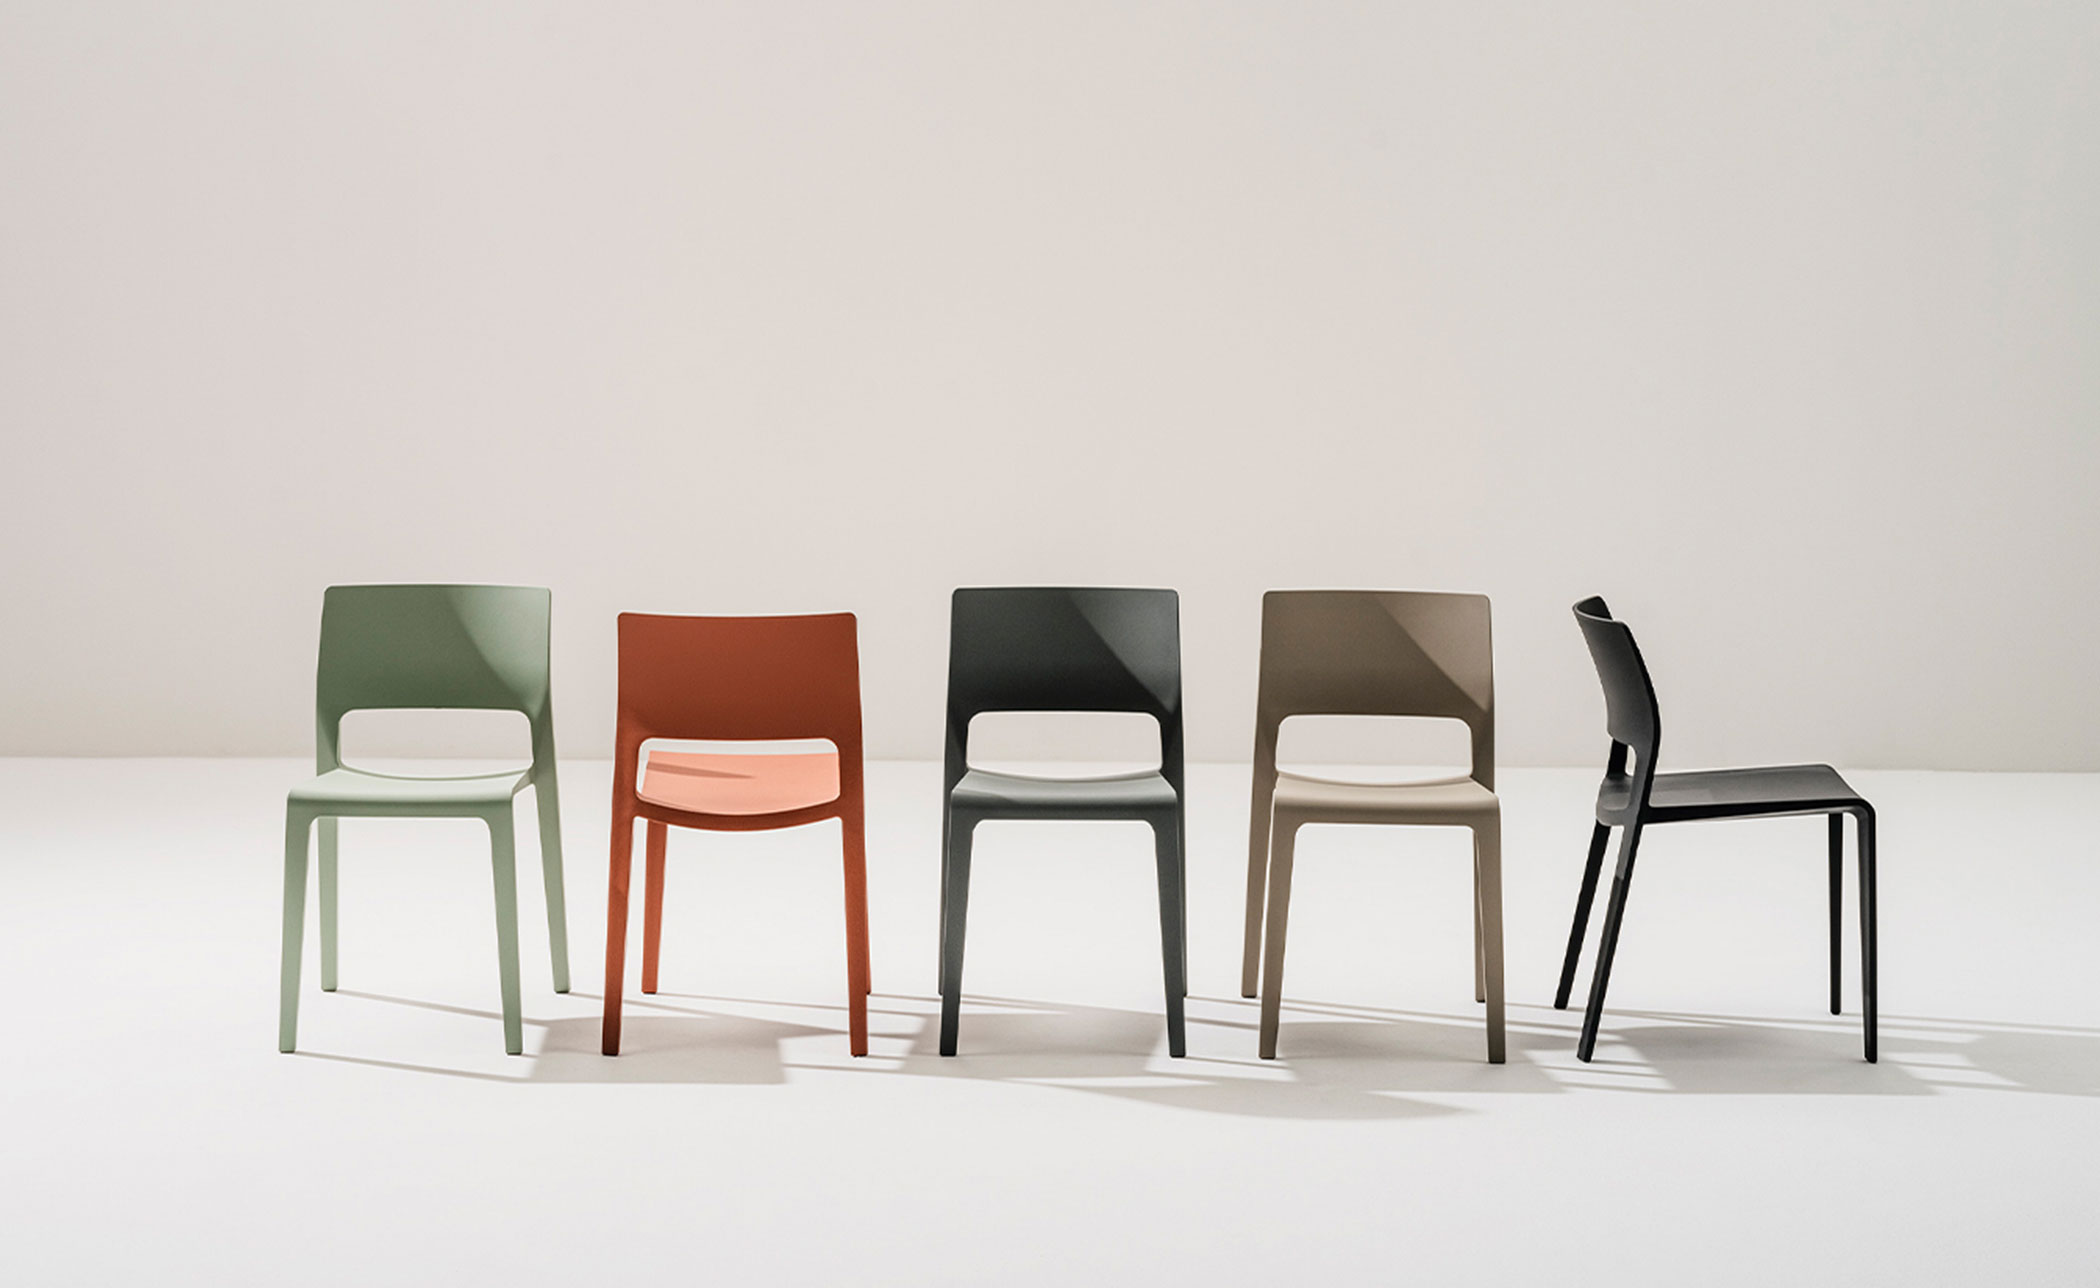 Juno 02 Stacking Chair by James Irvine for Arper | hive